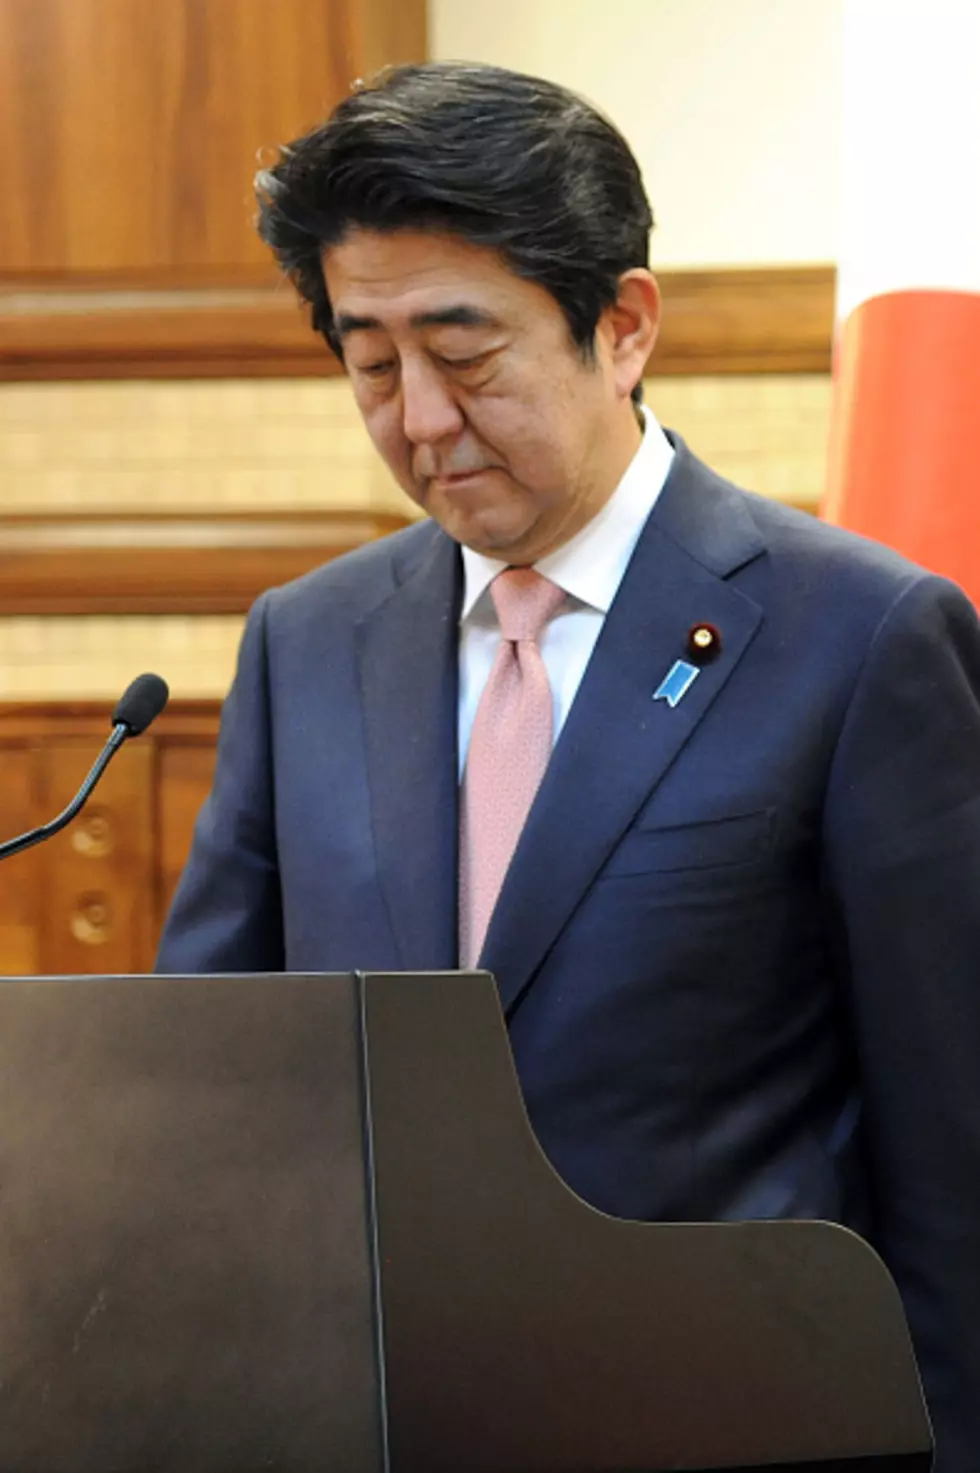 Japanese People Mourn Death of Kenji Goto, PM Shinzo Abe Condemns Islamic State Group